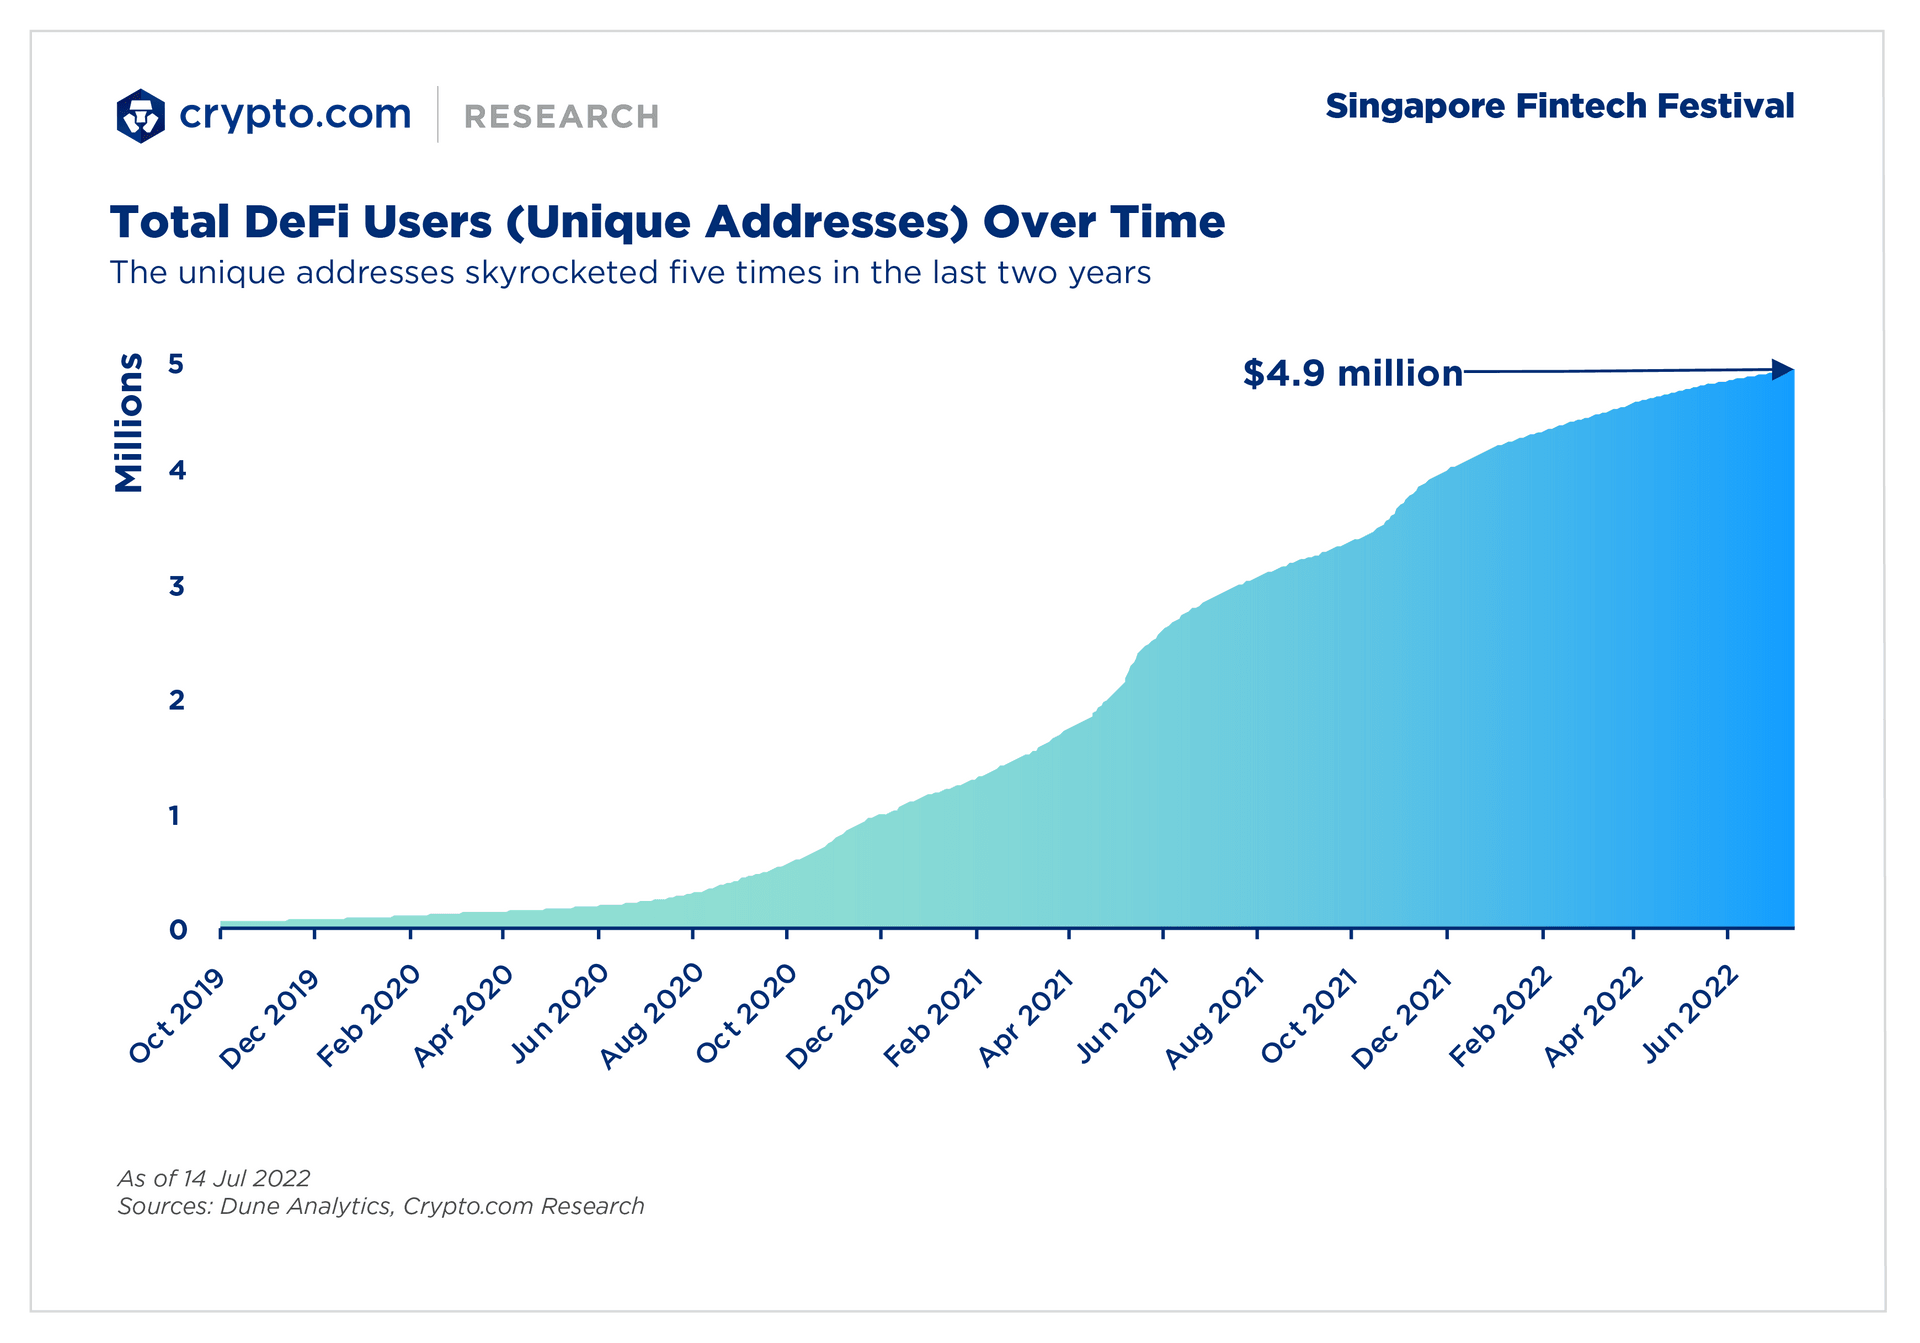 Total DeFi Users (unique addresses) over time